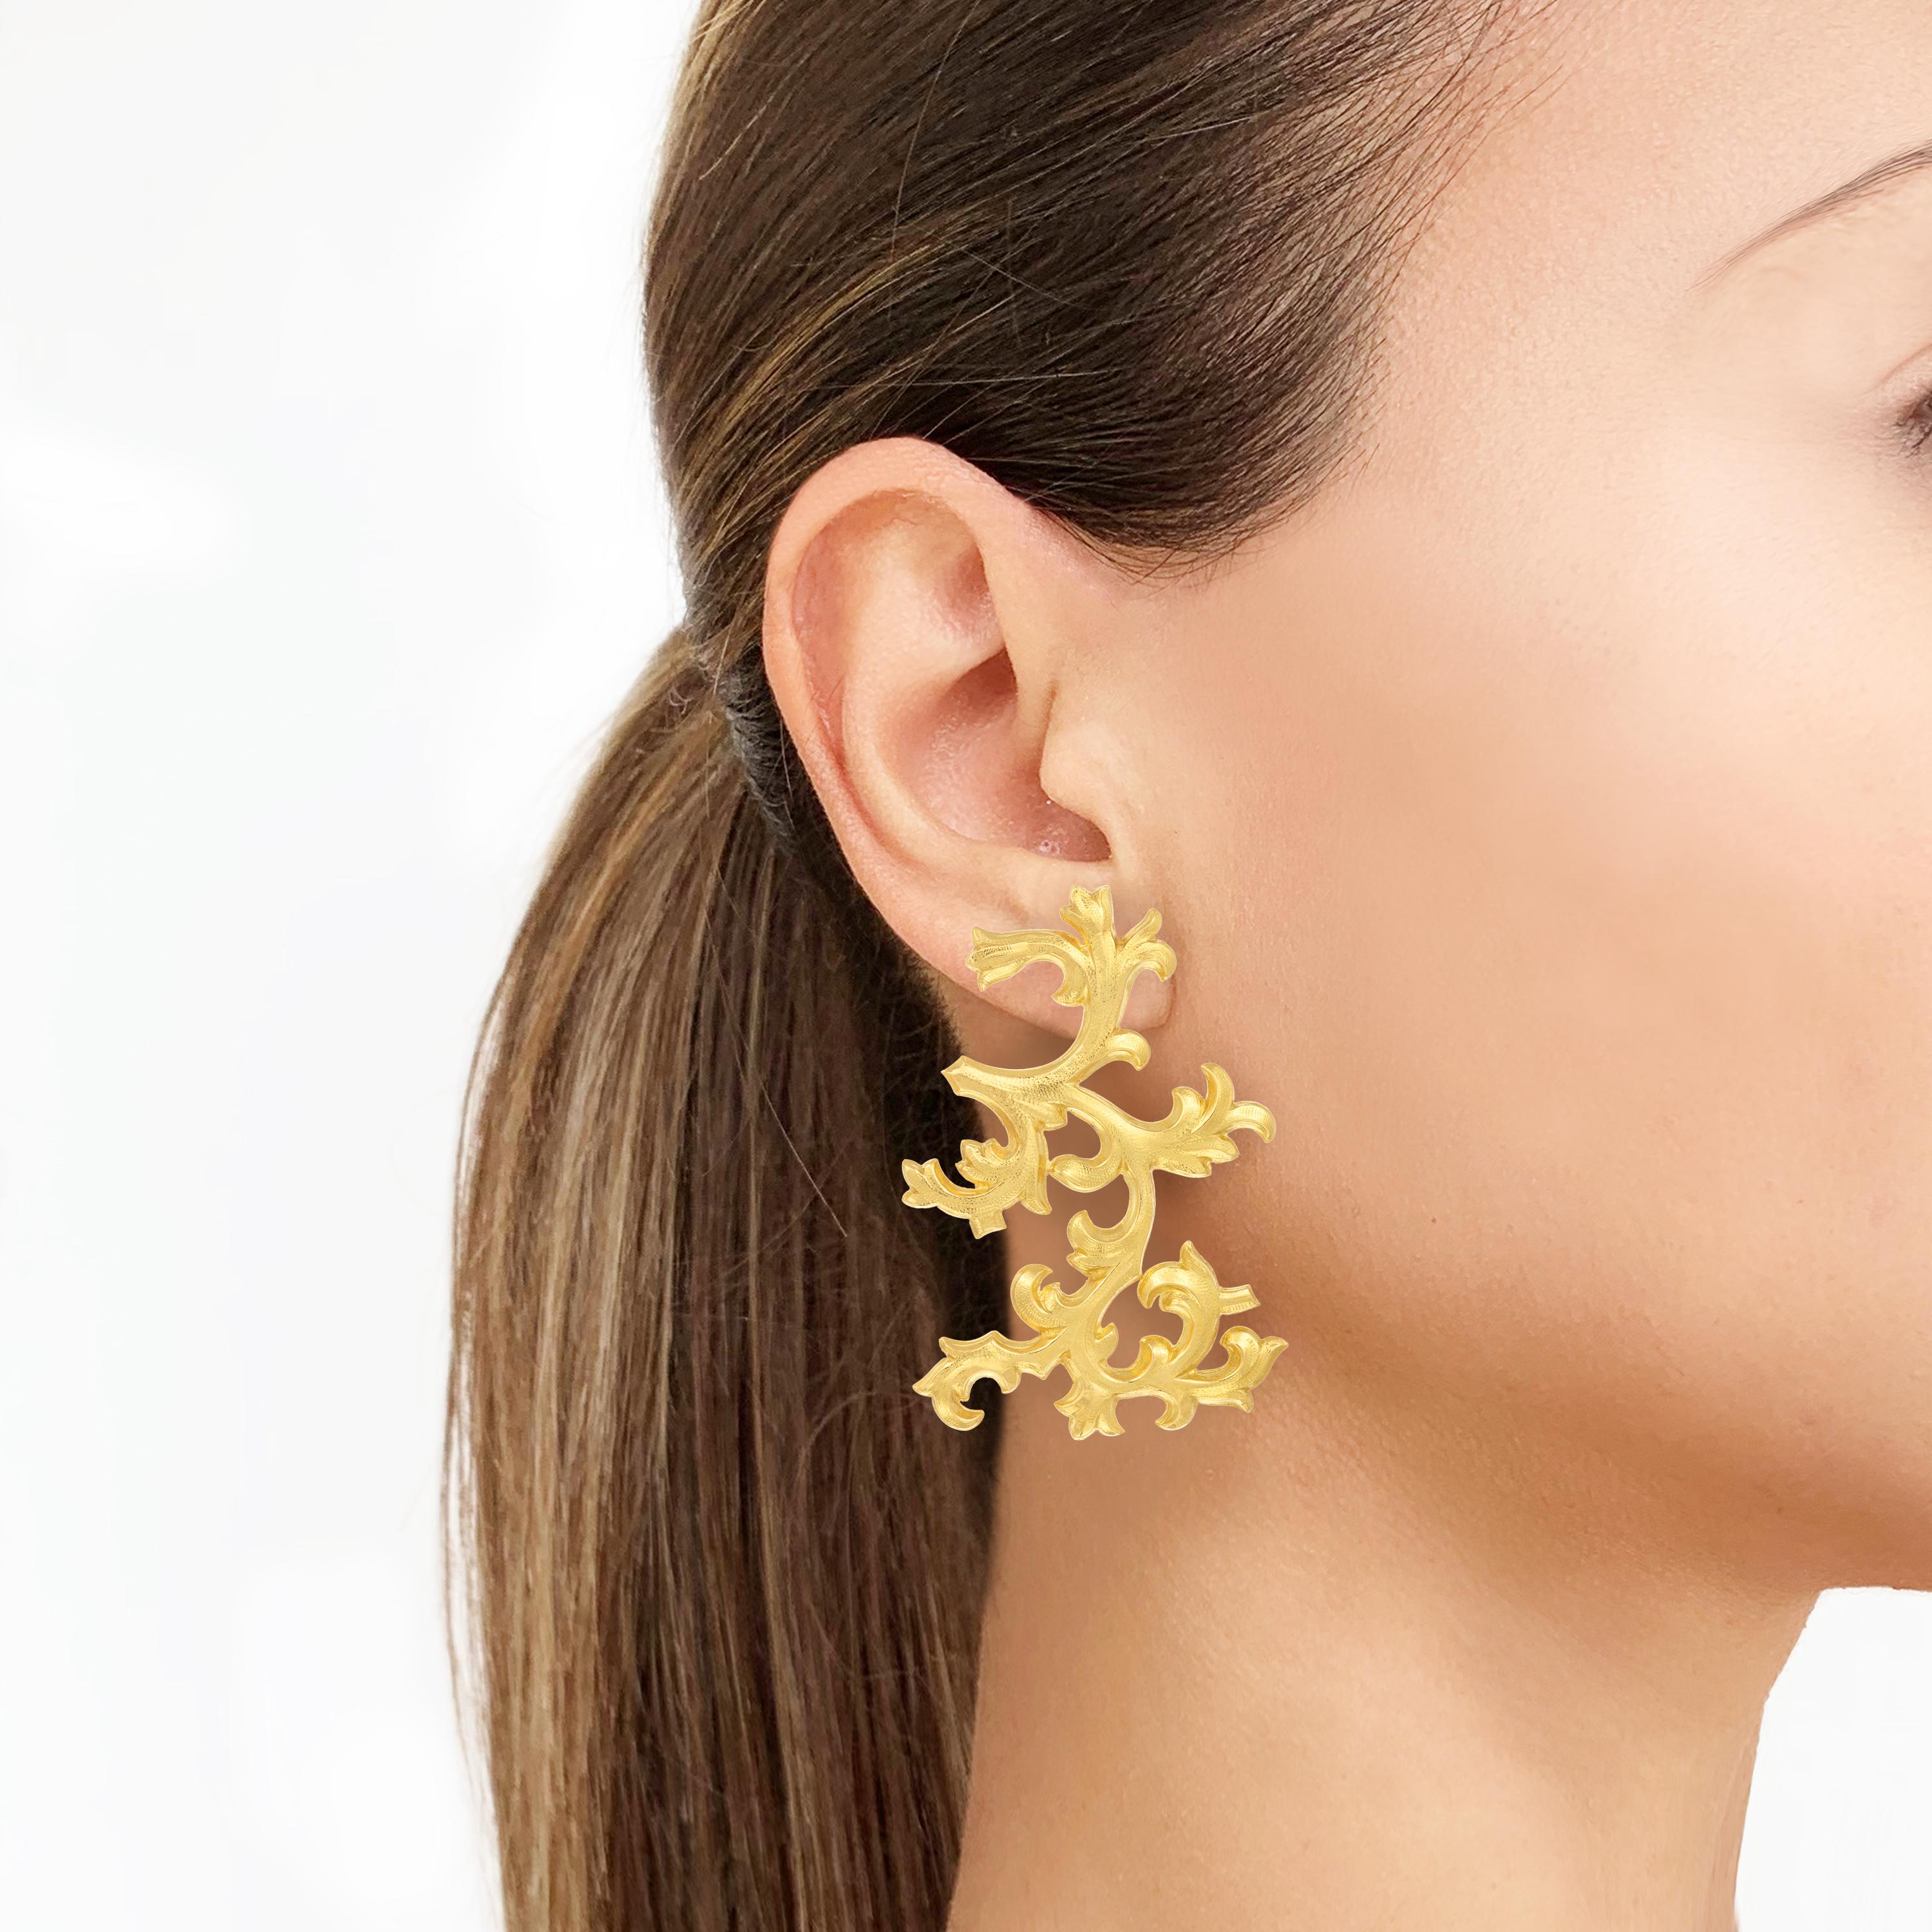 Rosior Contemporary Long earrings, hand chiseled by master craftsmen at Rosior atelier.
5.5cm /2.16